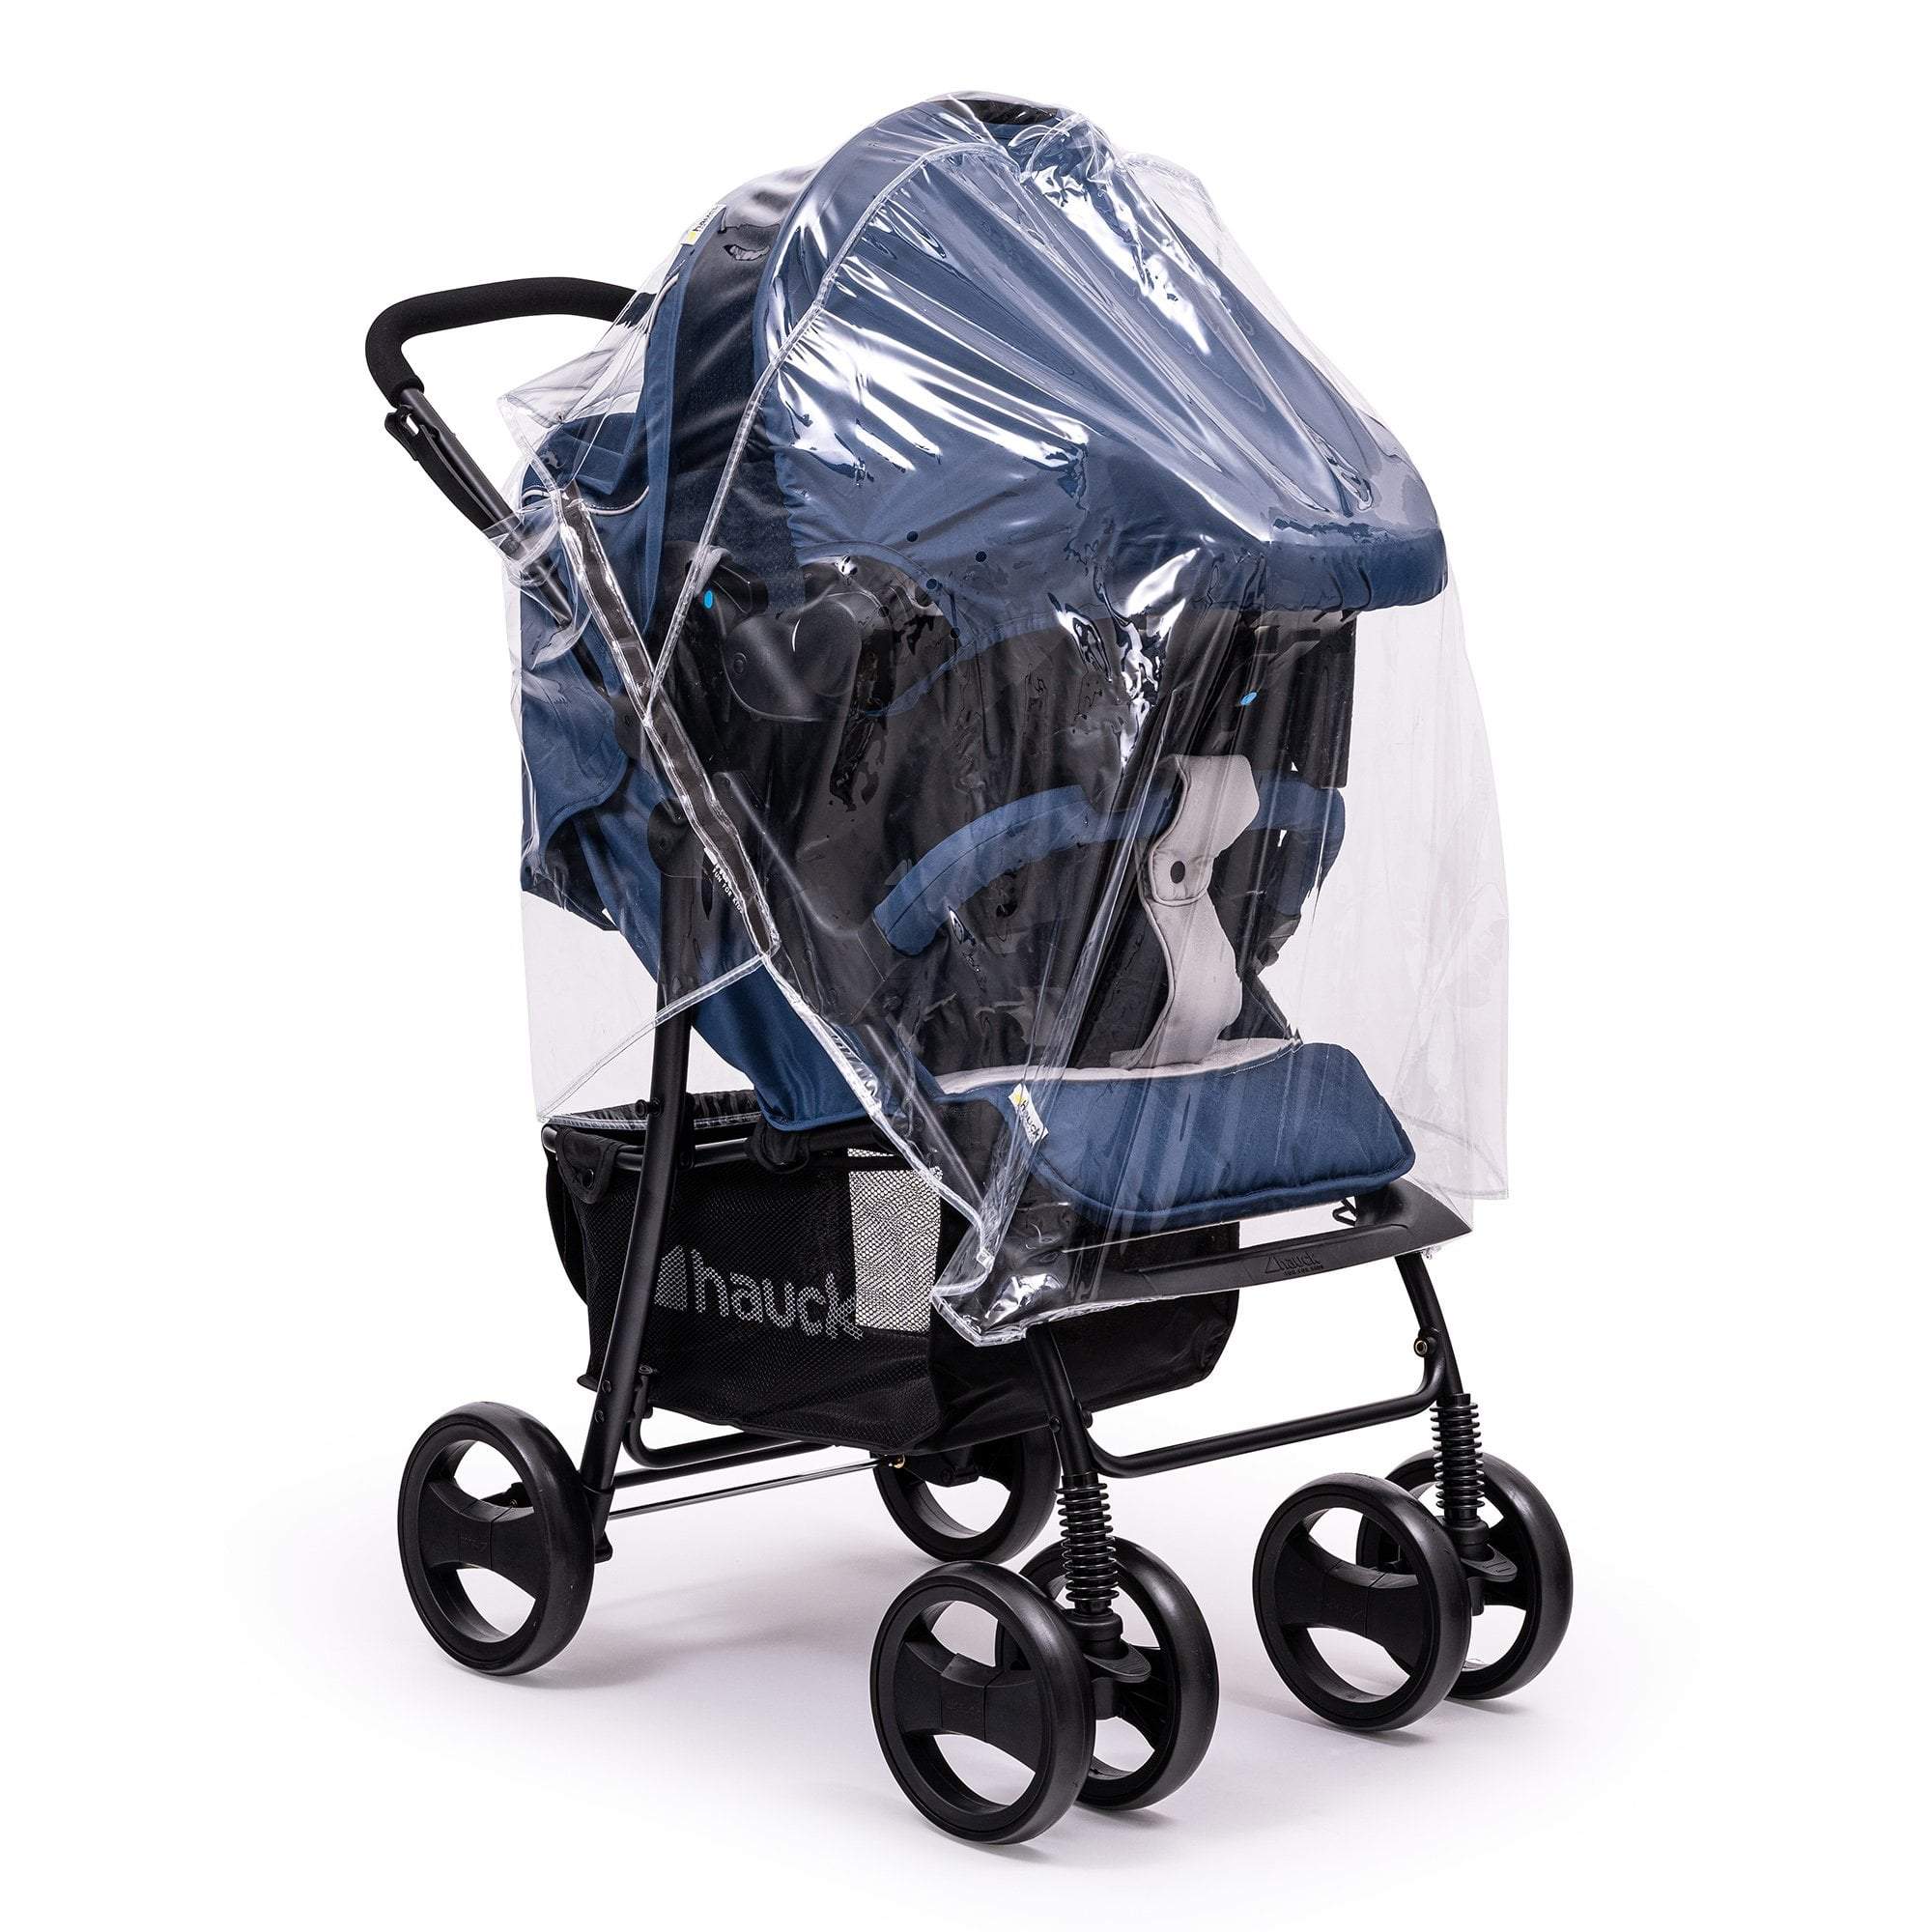 Travel System Raincover Compatible with Bebecar - Fits All Models - For Your Little One